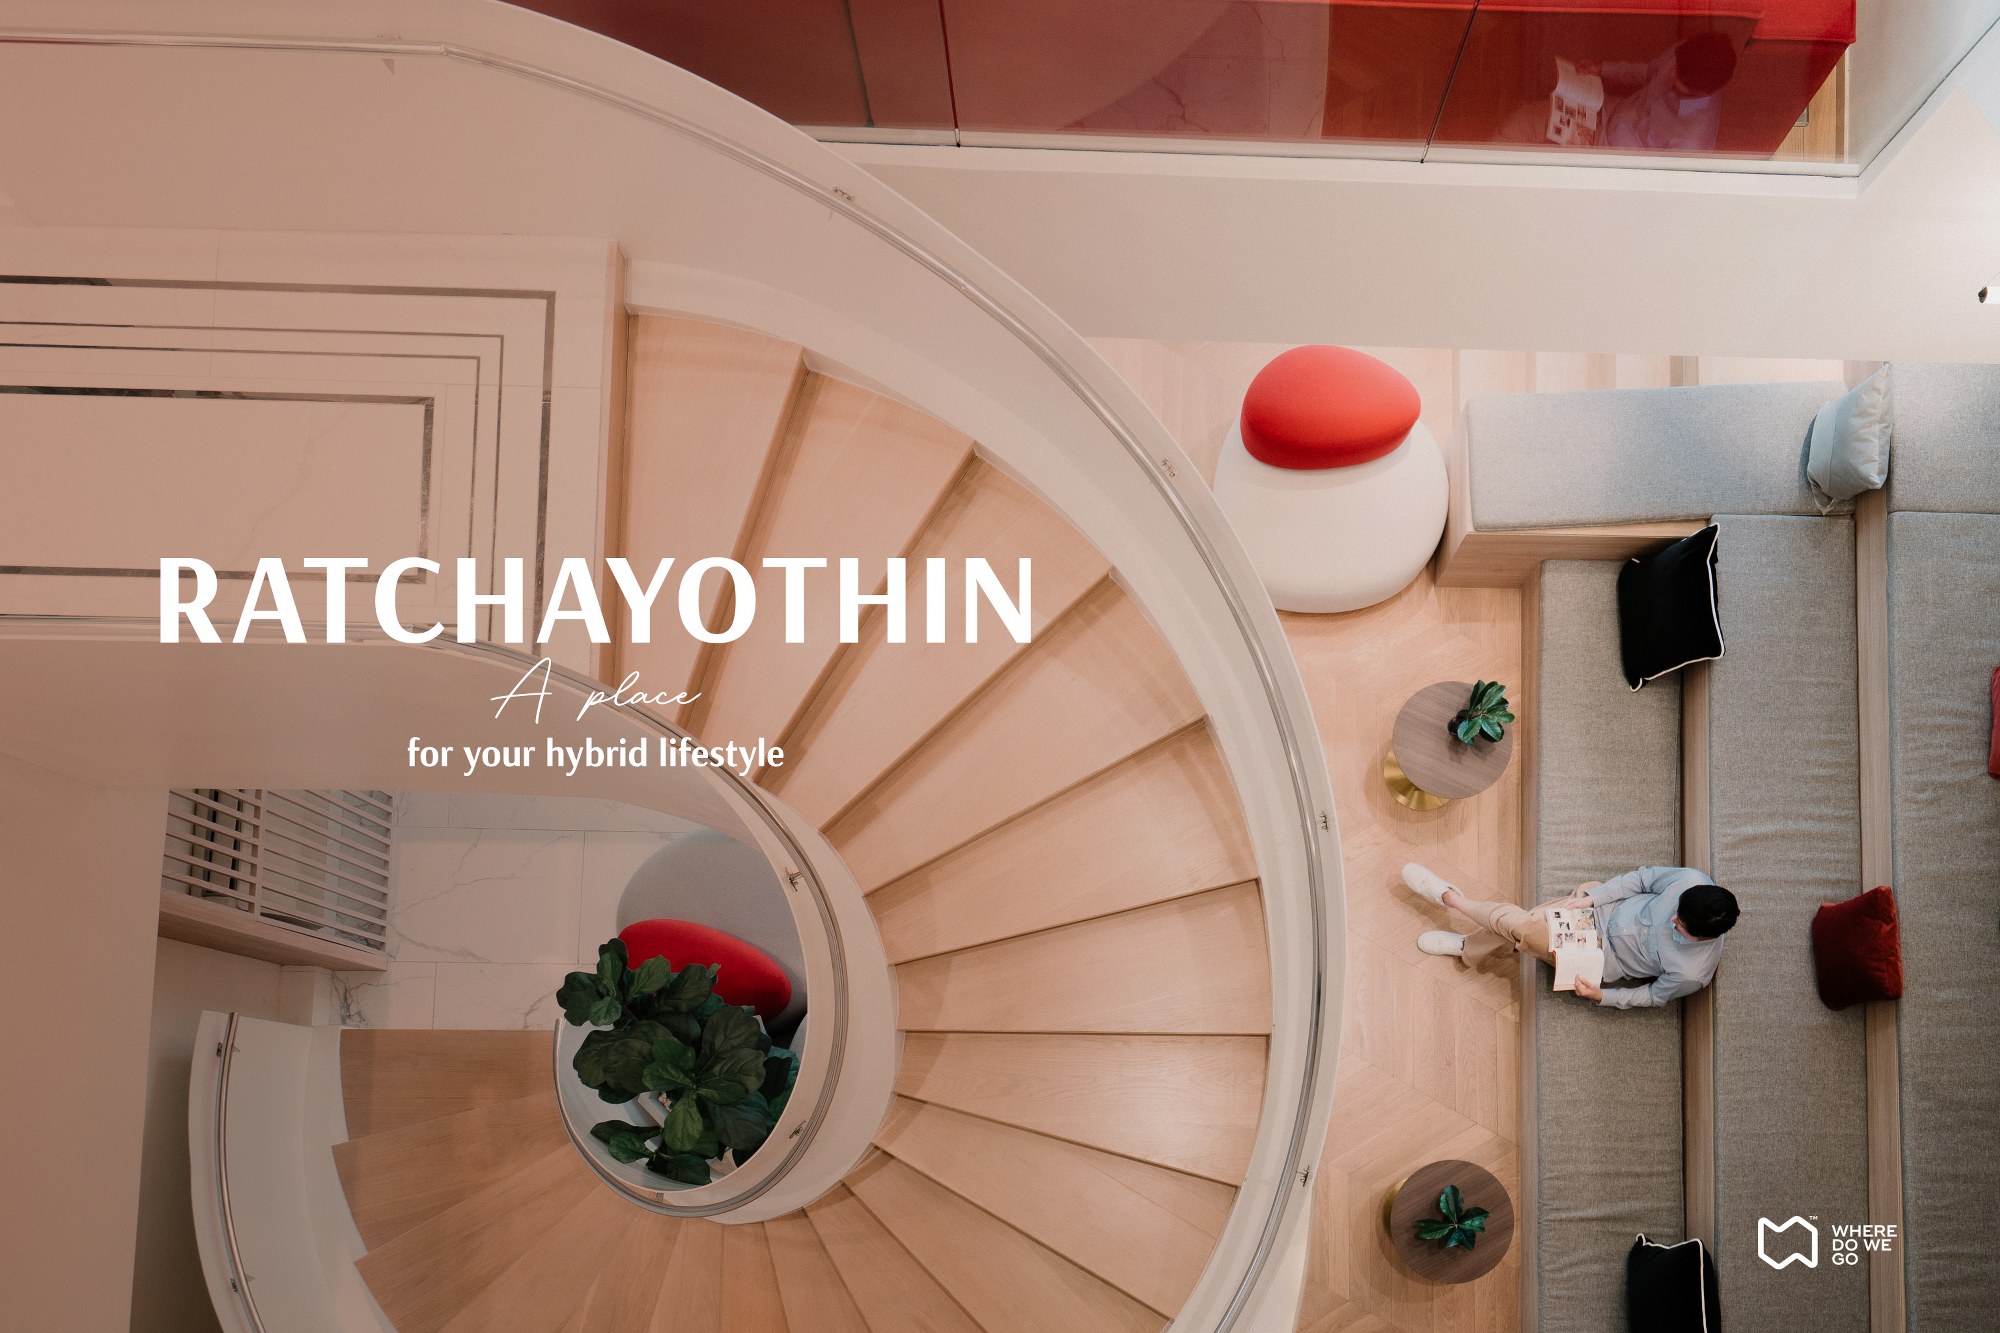 RATCHAYOTHIN, A place for your hybrid lifestyle.